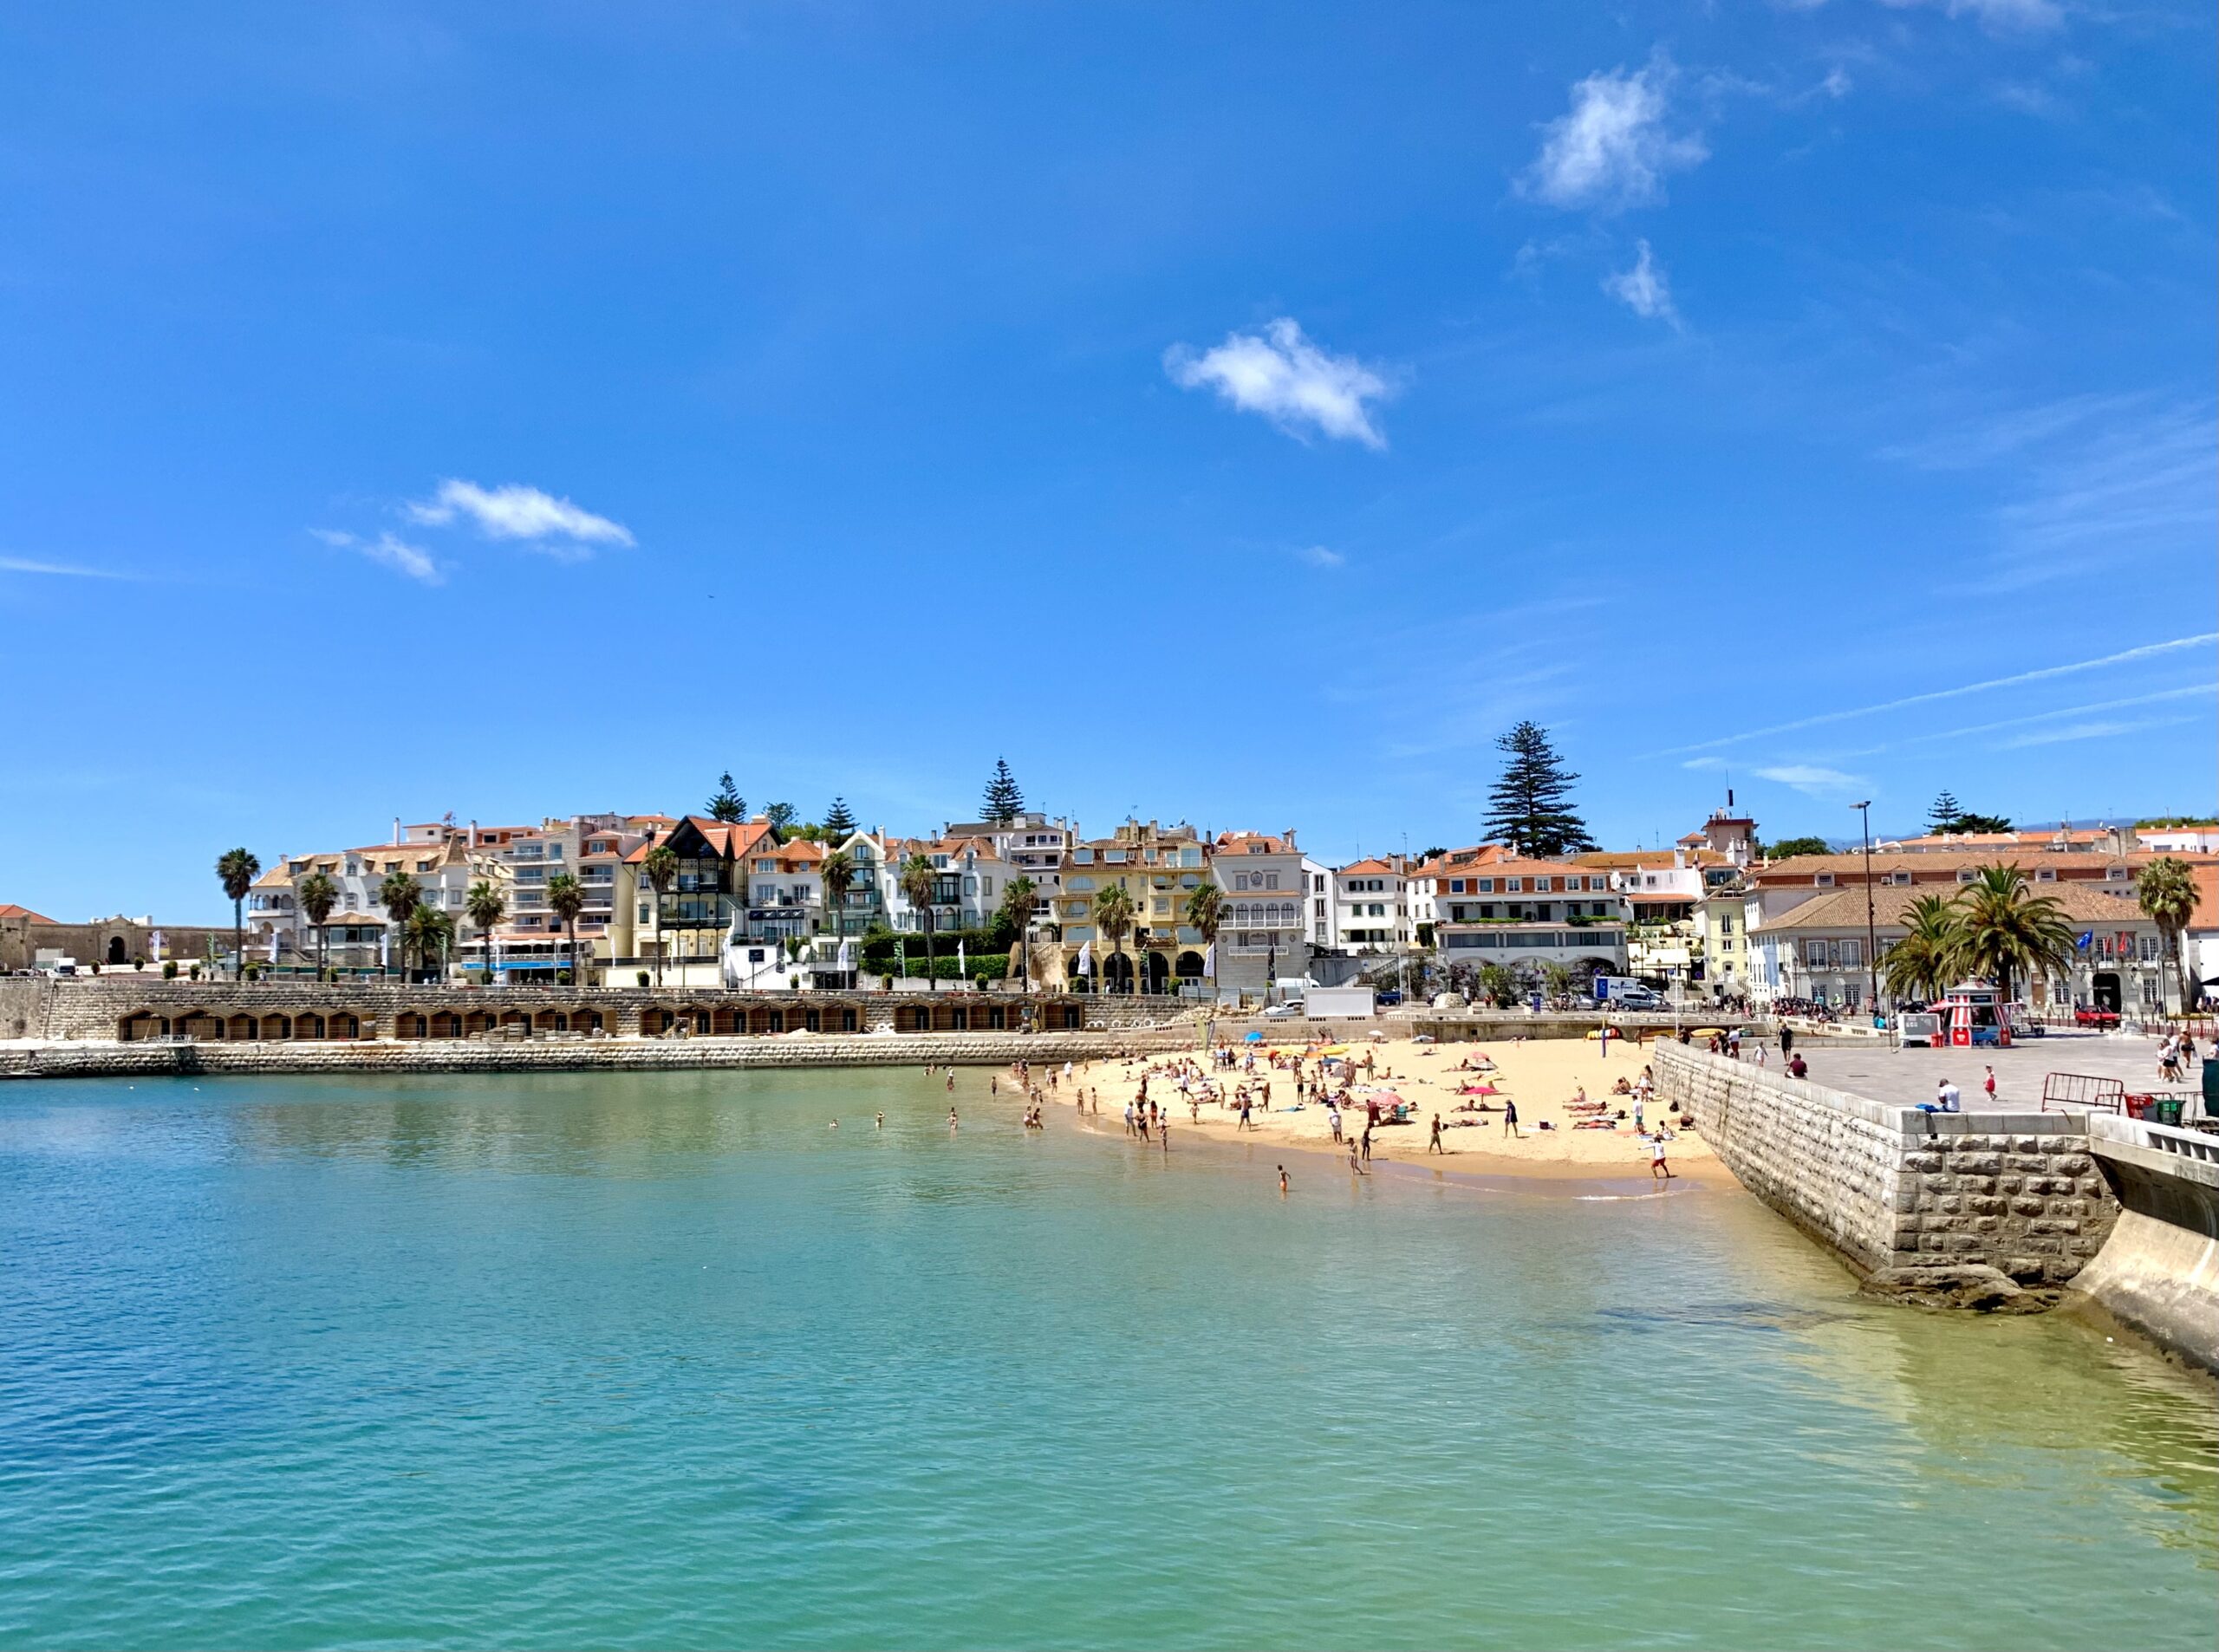 Moving to Portugal - a great lifestyle decision for Americans and digital nomads.